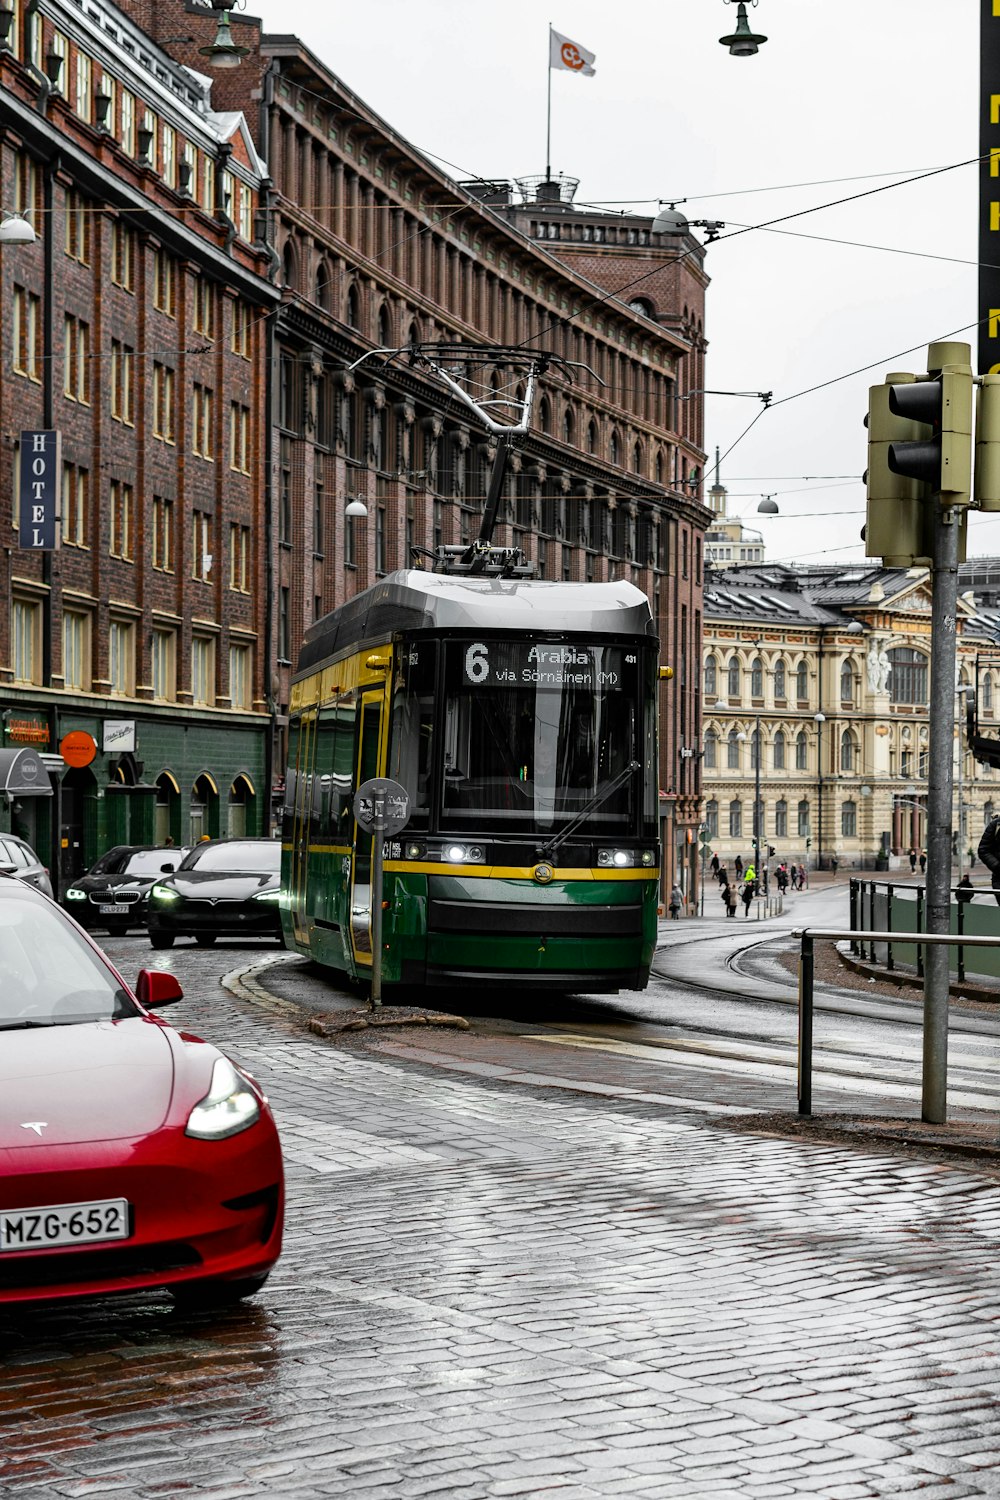 a street scene with a red car and a green bus